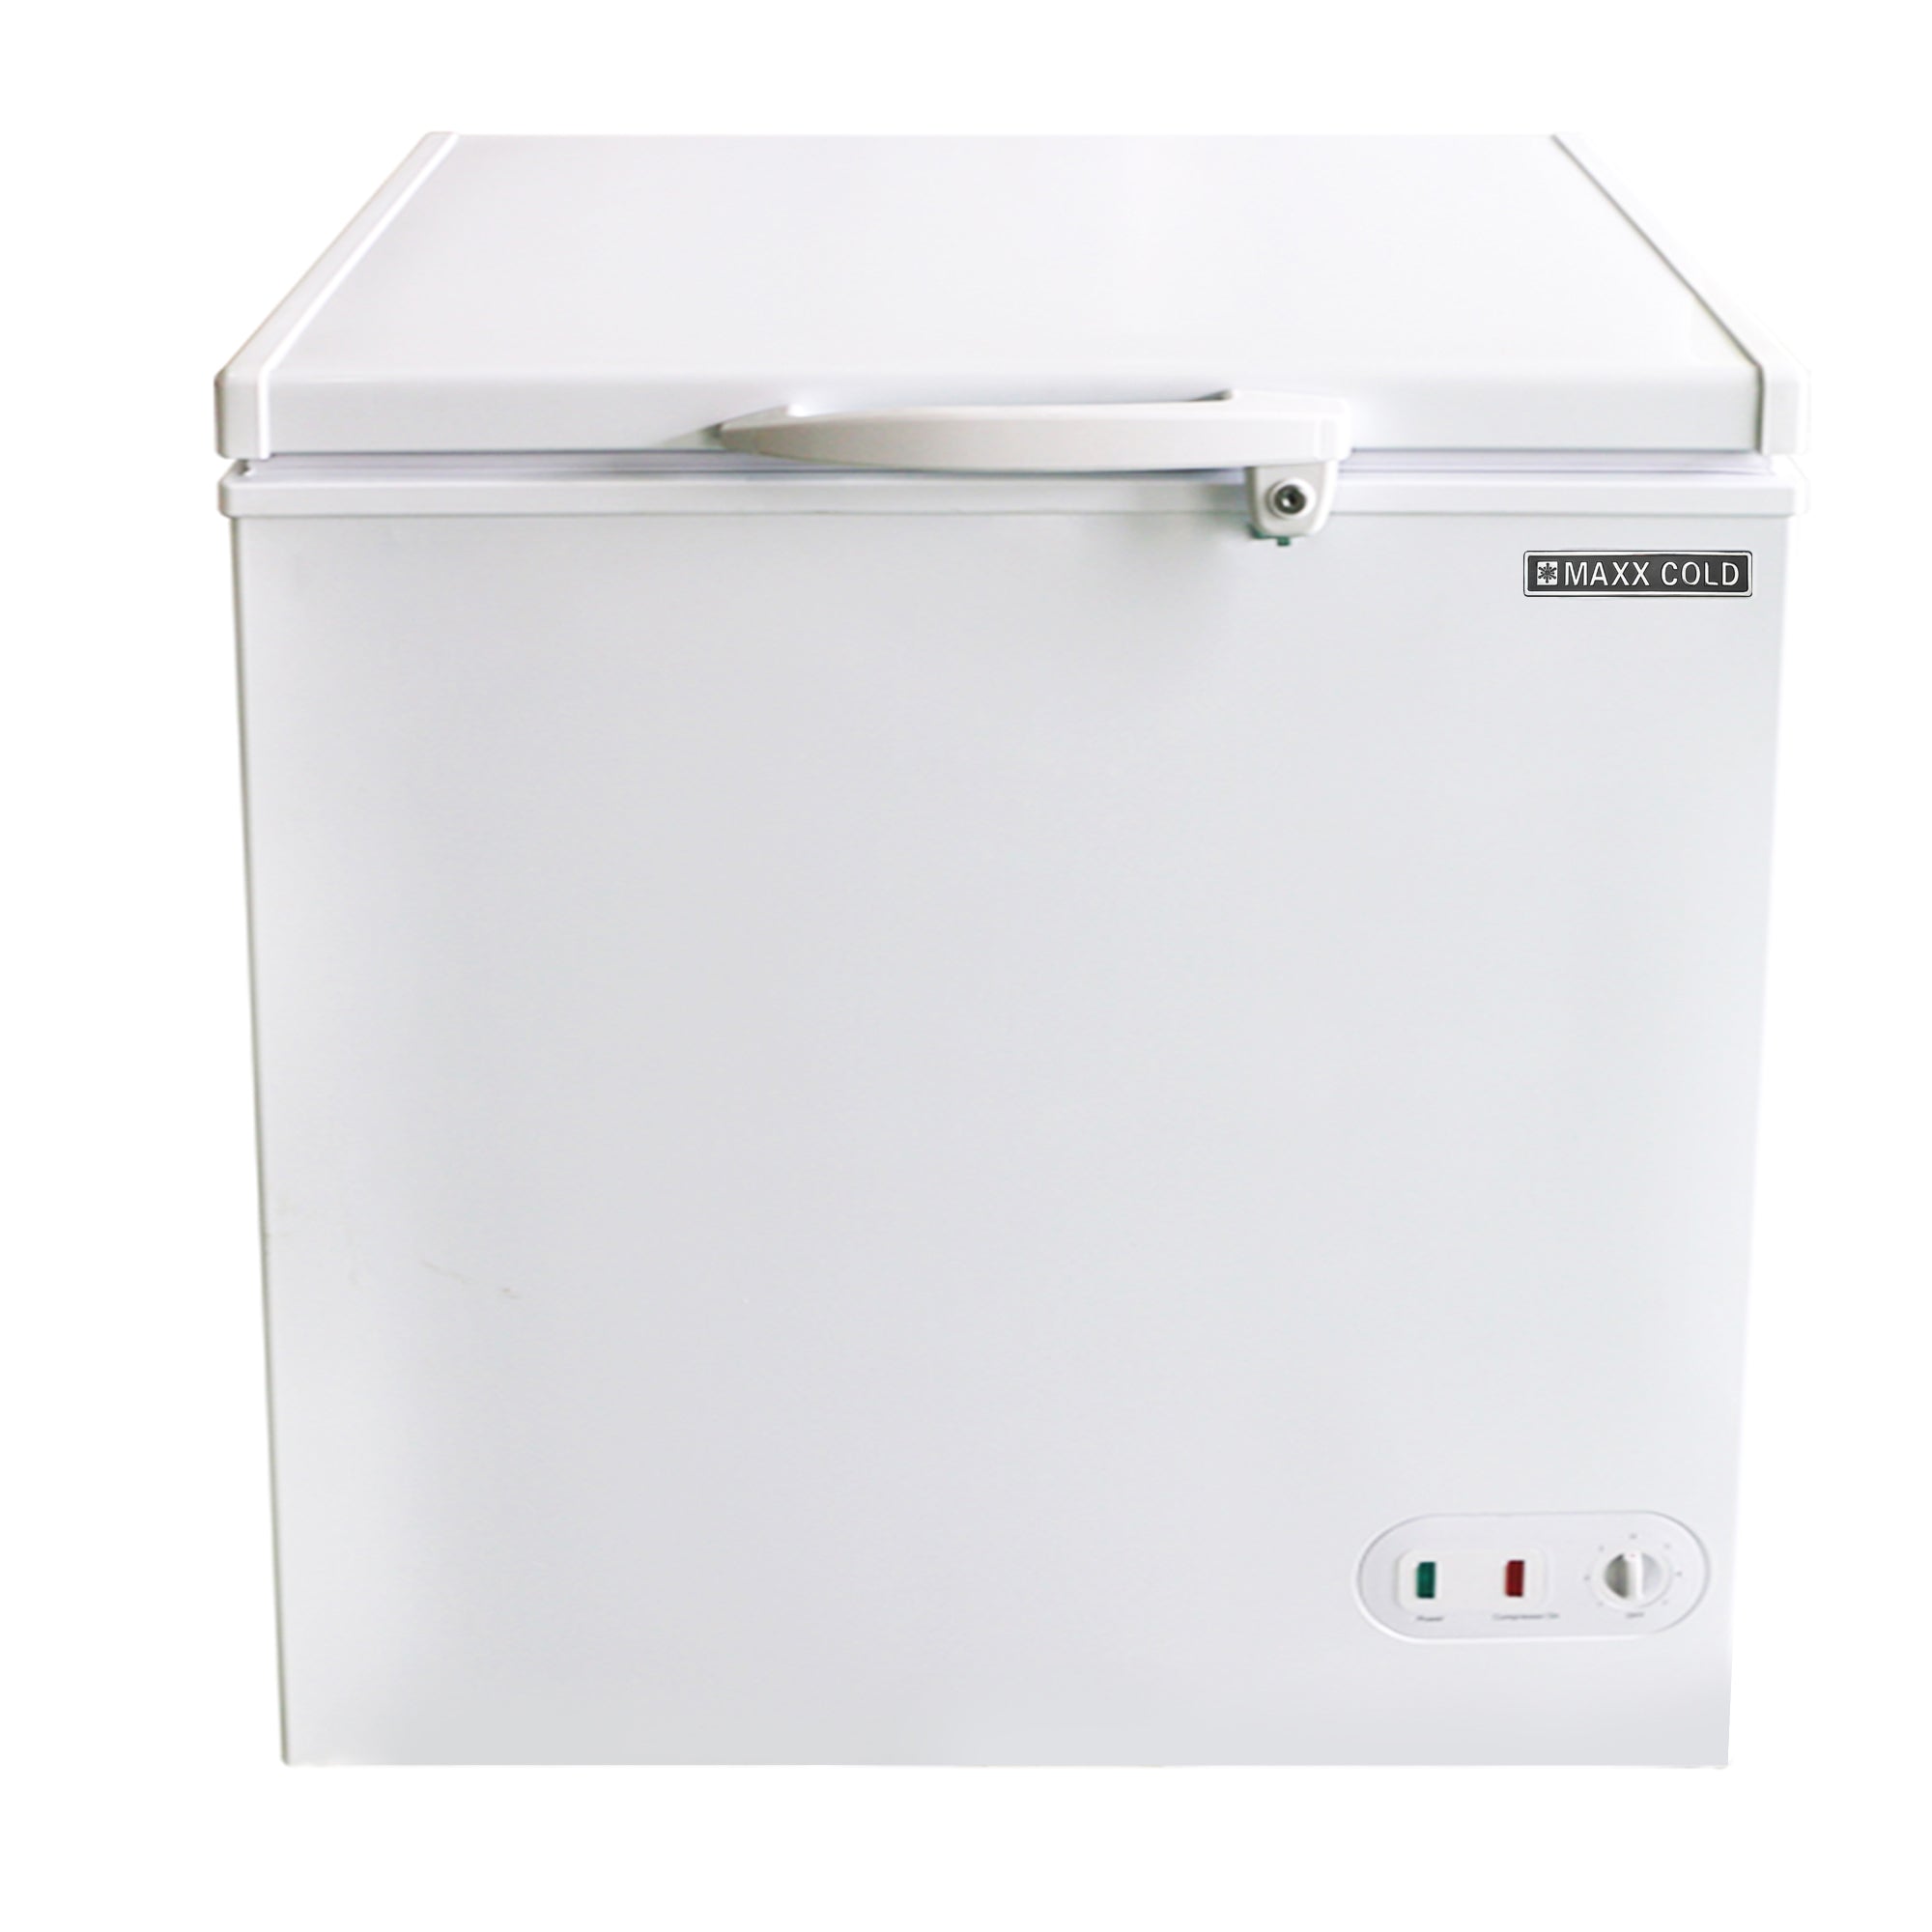 Maxx Cold - MXSH5.2SHC, Maxx Cold Compact Chest Freezer with Solid Top, 30.4"W, 5.2 cu. ft. Storage Capacity, Locking Lid, Garage Ready, in White